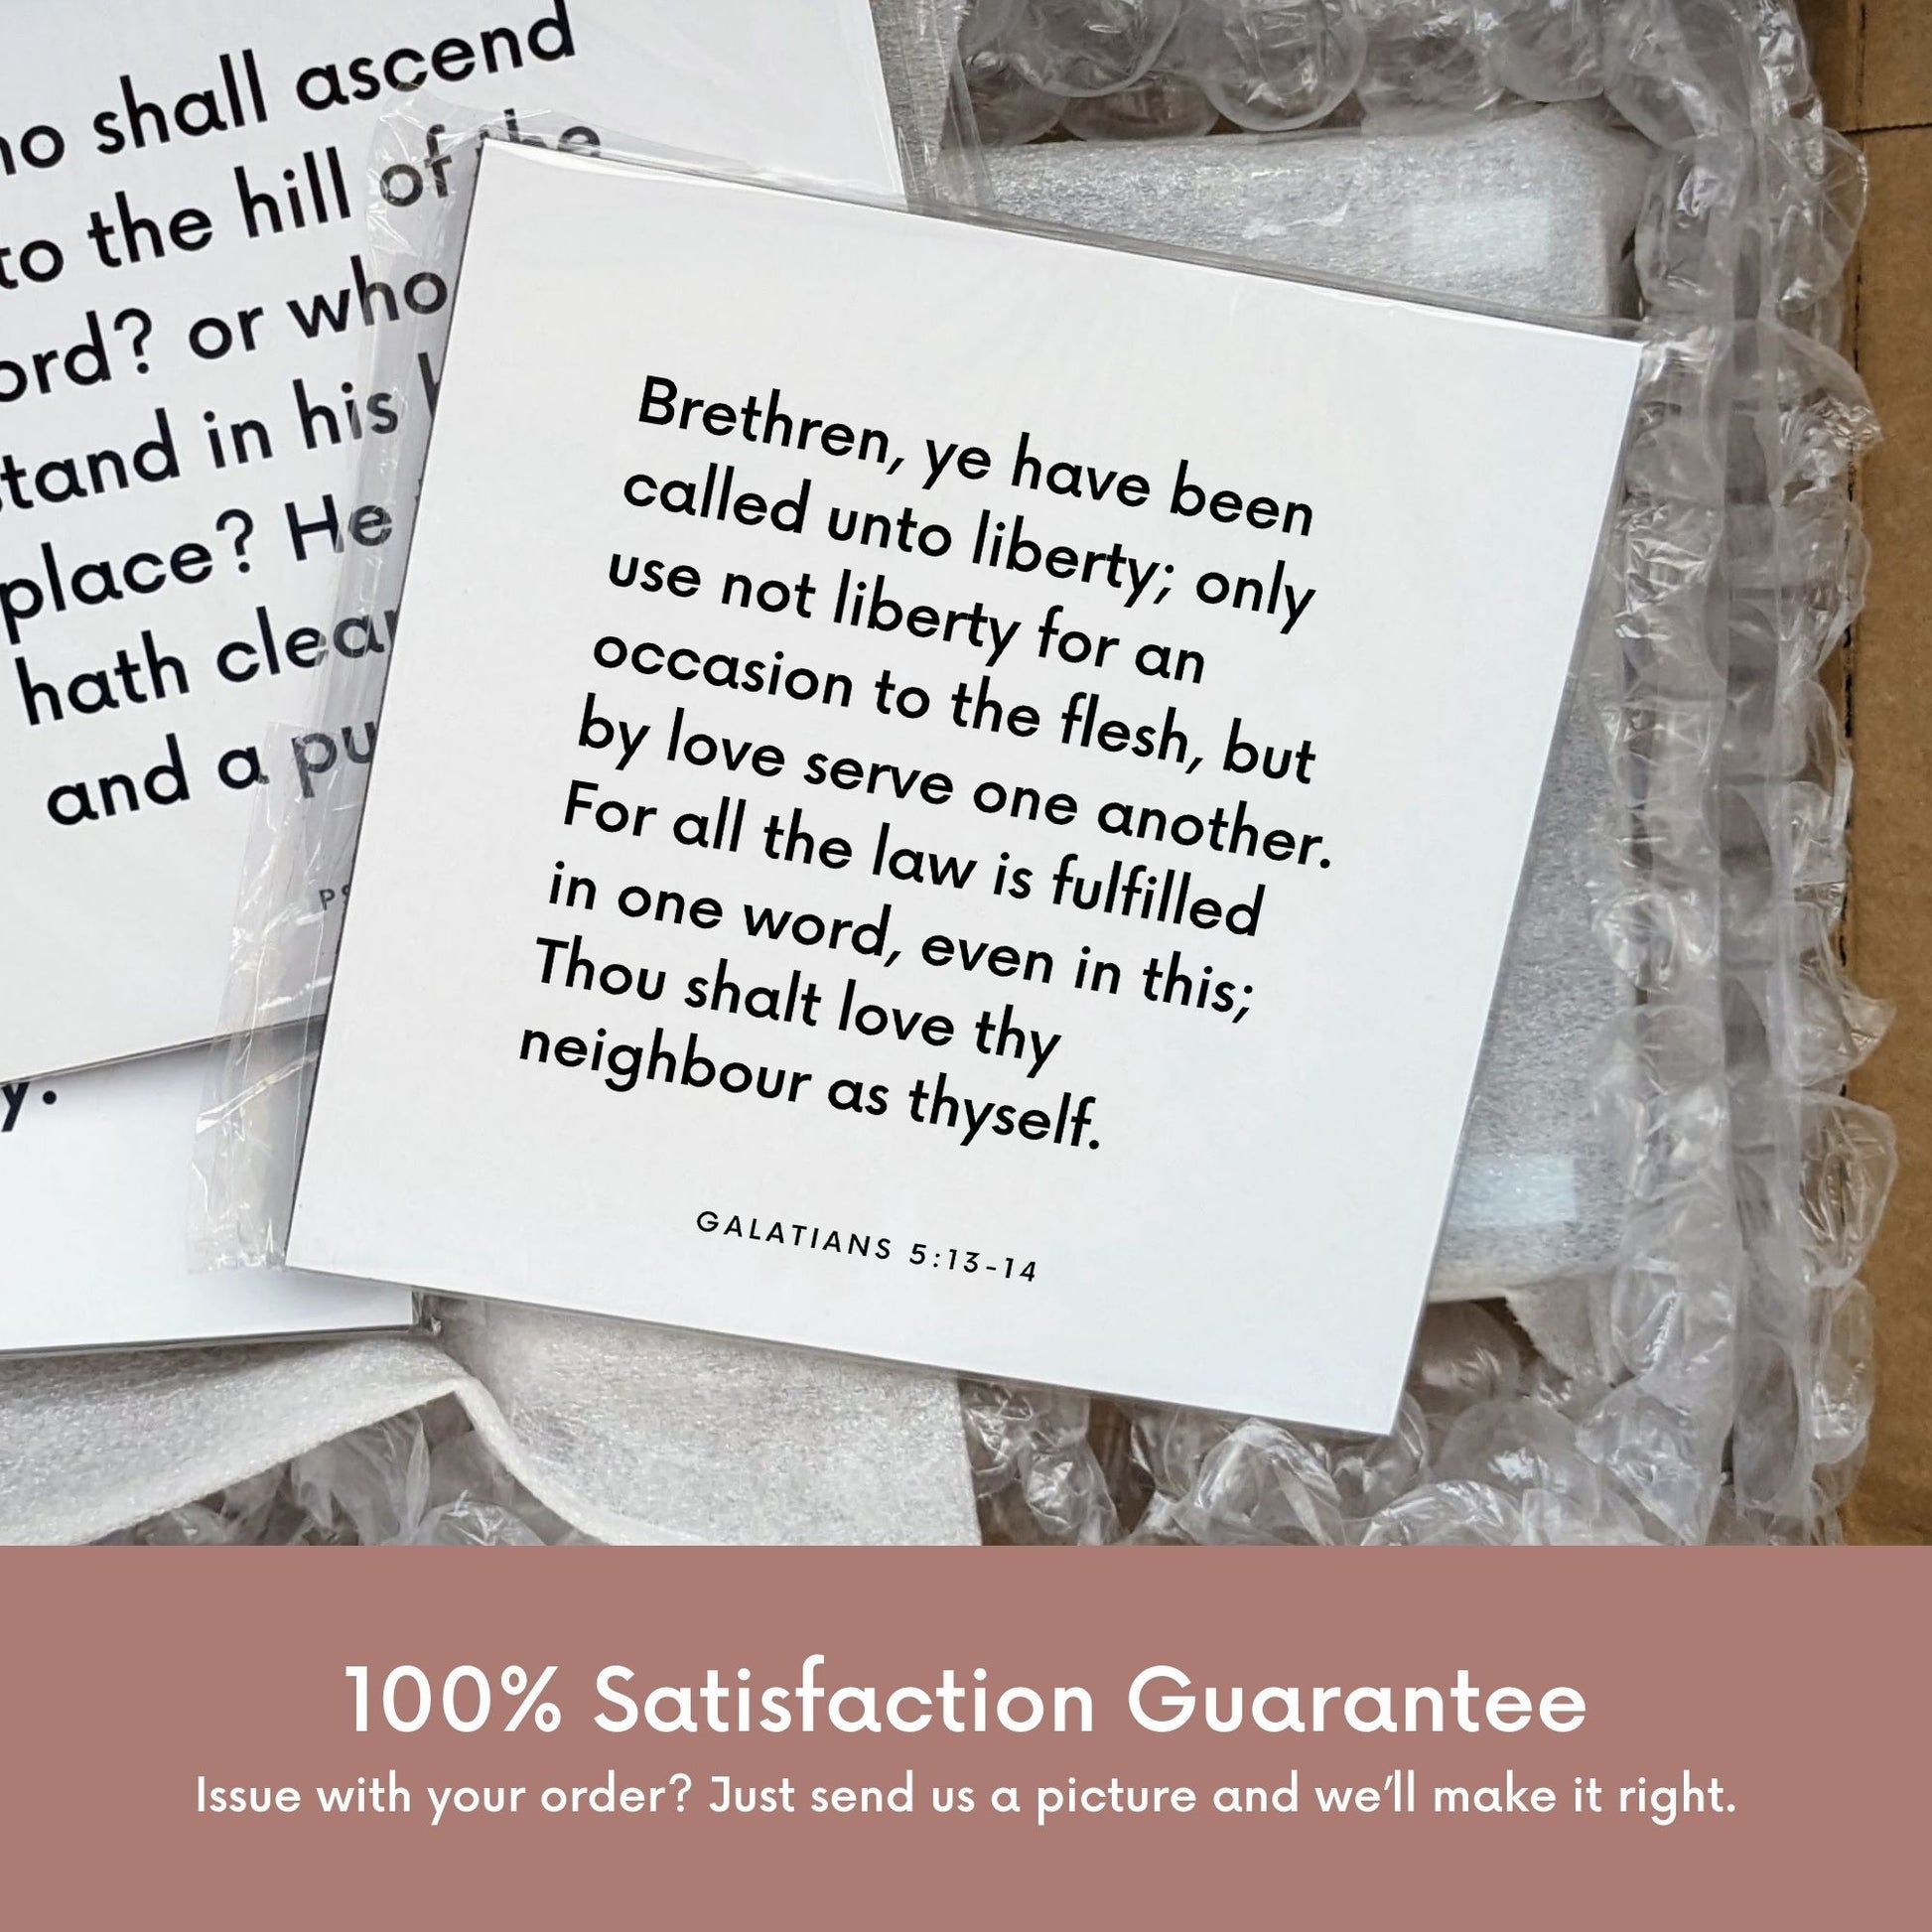 Shipping materials for scripture tile of Galatians 5:13-14 - "Ye have been called unto liberty"